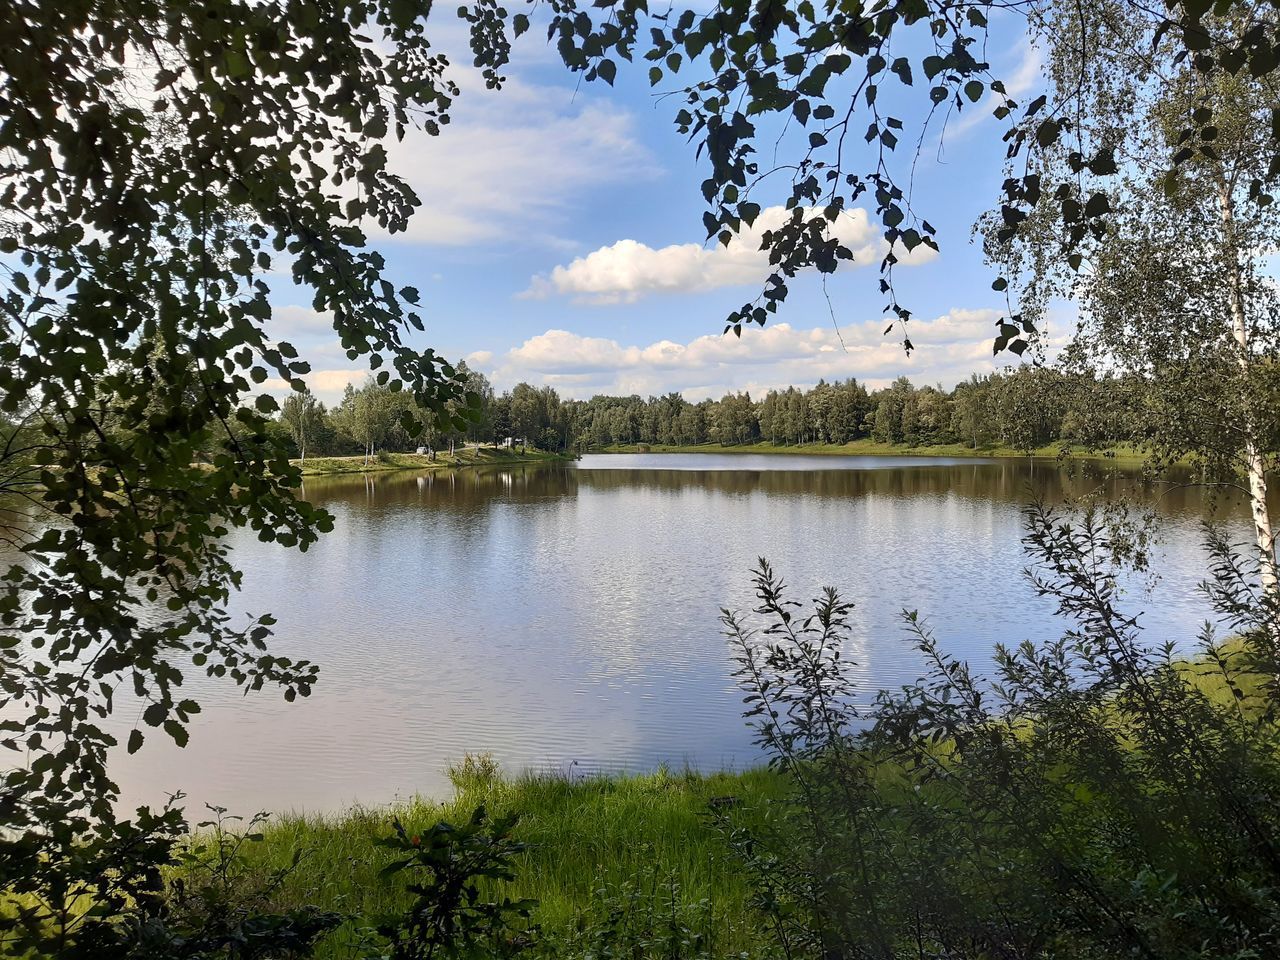 SCENIC VIEW OF LAKE WITH REFLECTION AGAINST SKY